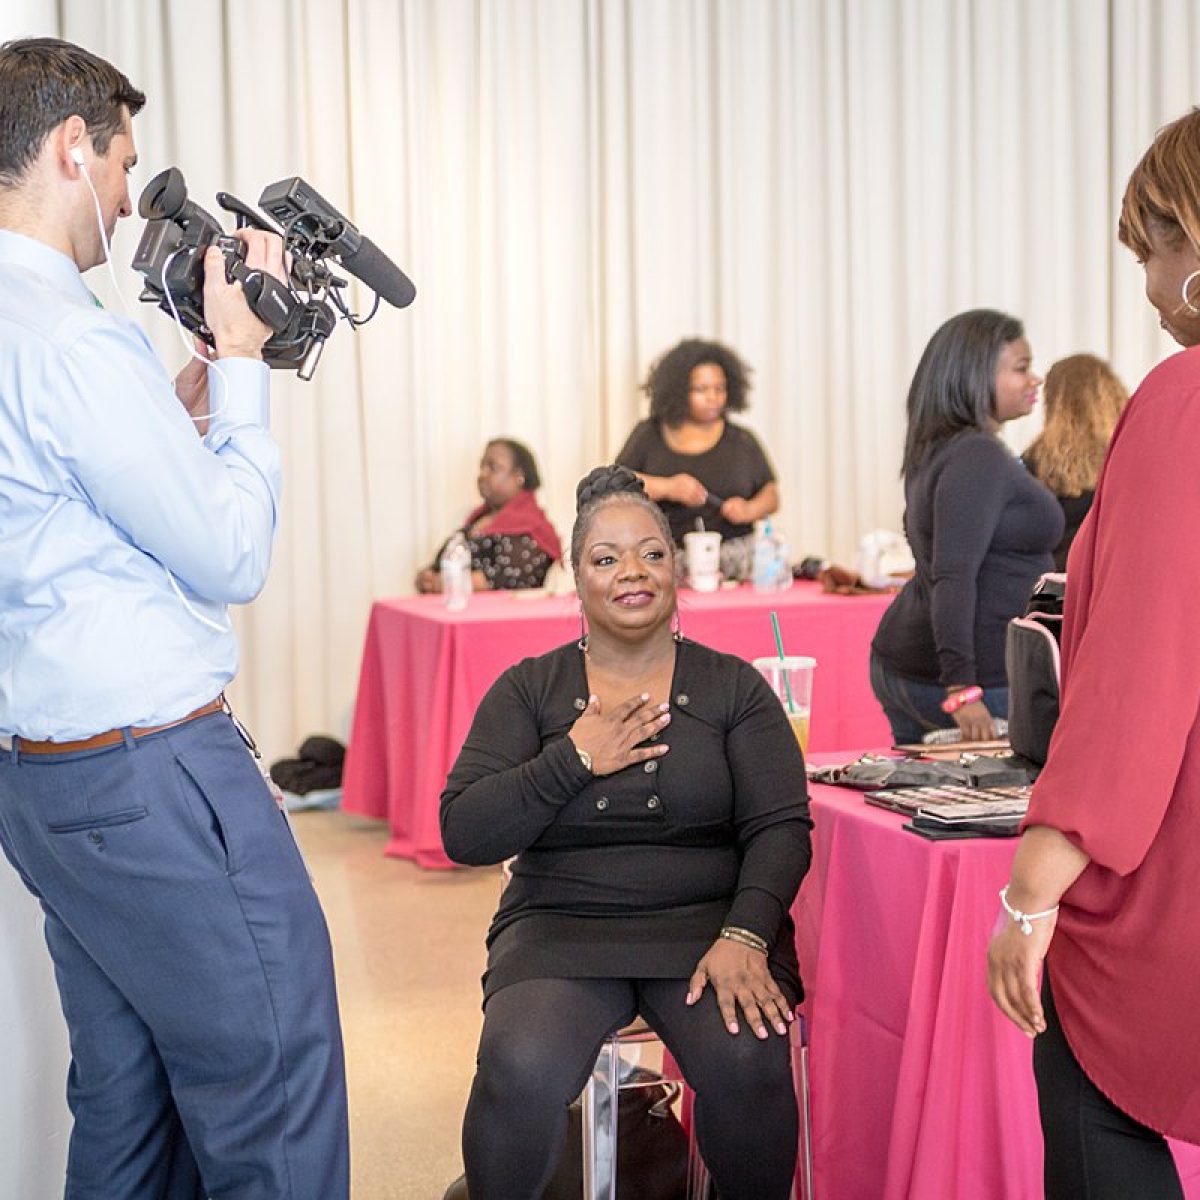 ABC Channel 7 in Chicago featured our Mother's Day makeover event from 2017. The snippet featured moms, sponsors, volunteers and smiles all around!